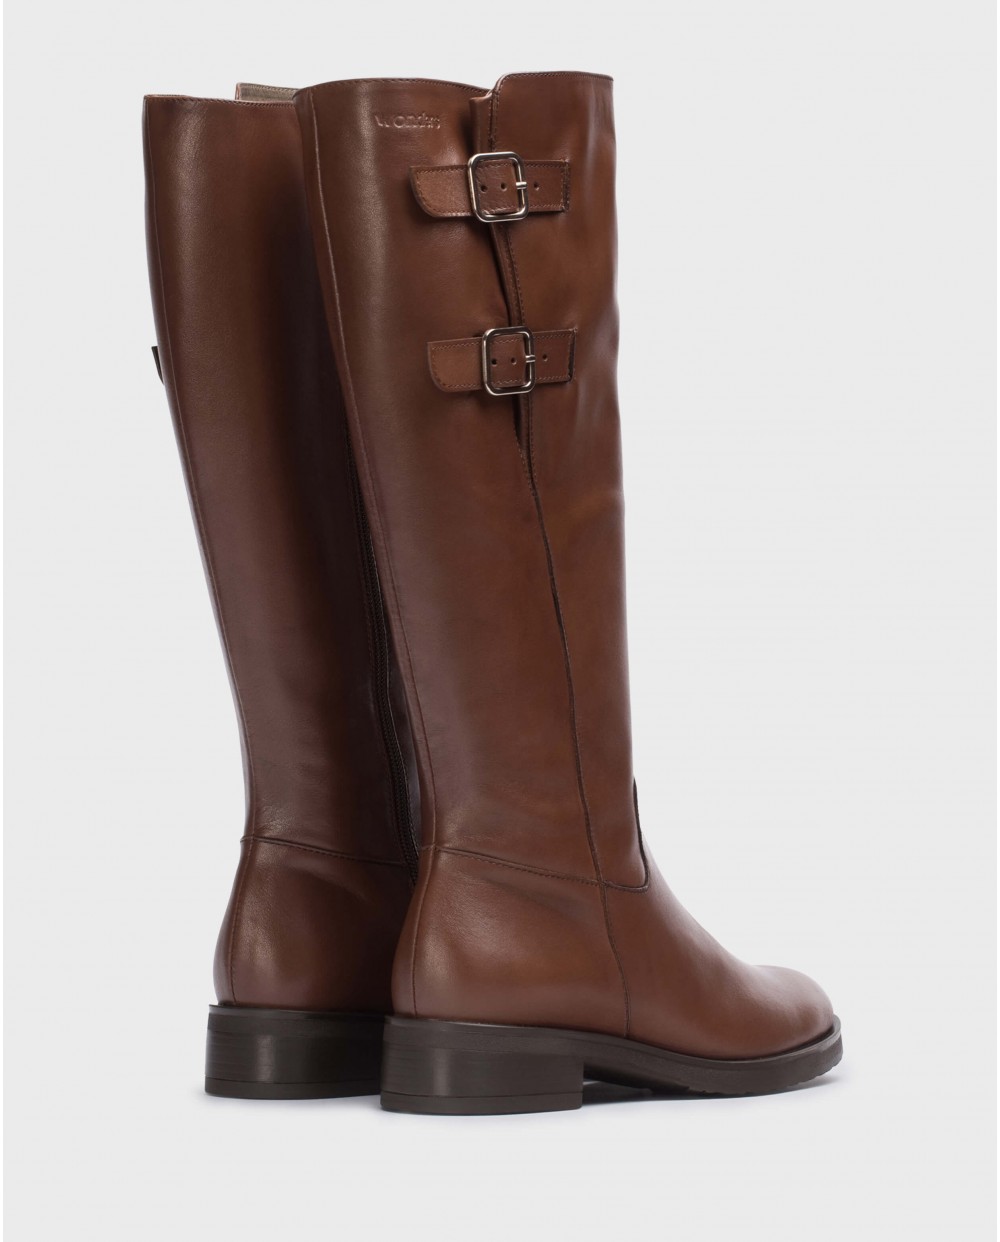 Boot with two buckles